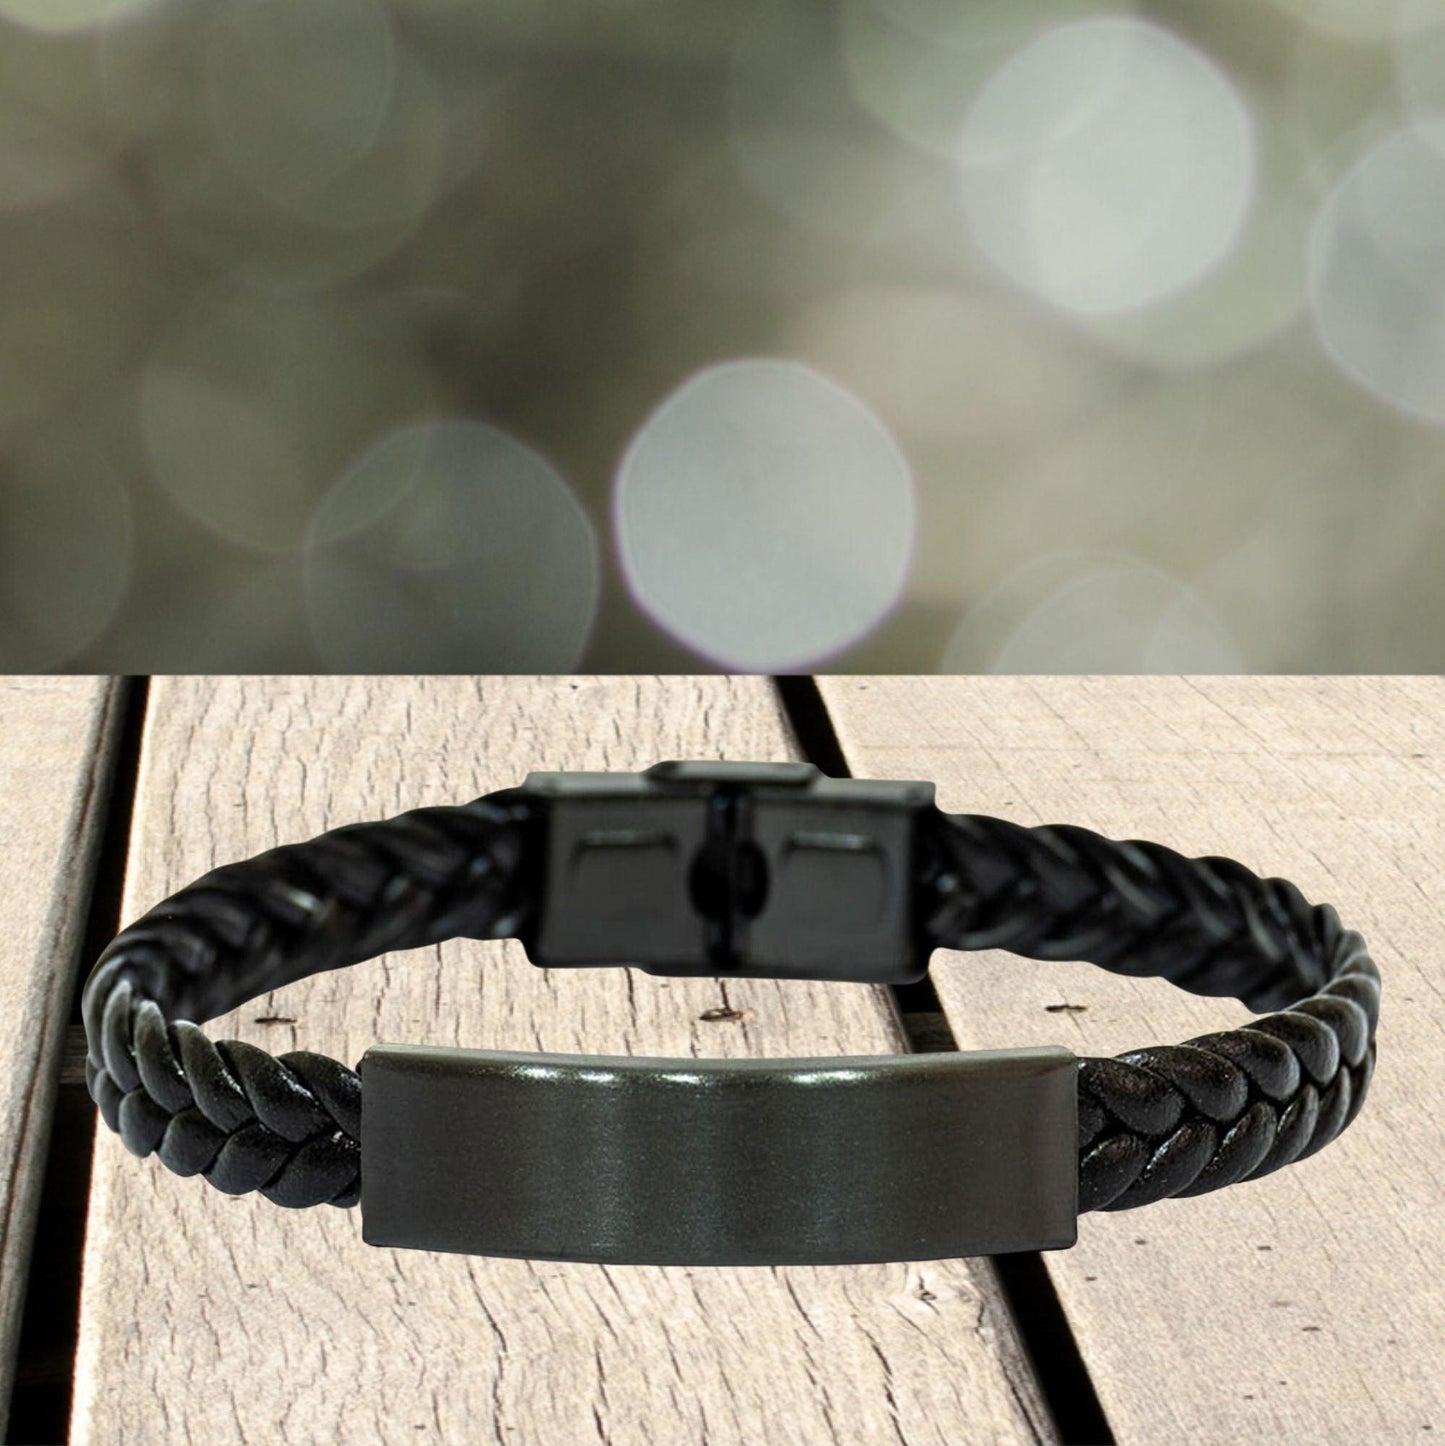 Godmother Christmas Perfect Gifts, Godmother Braided Leather Bracelet, Motivational Godmother Engraved Gifts, Birthday Gifts For Godmother, To My Godmother Life is learning to dance in the rain, finding good in each day. I'm always with you - Mallard Moon Gift Shop